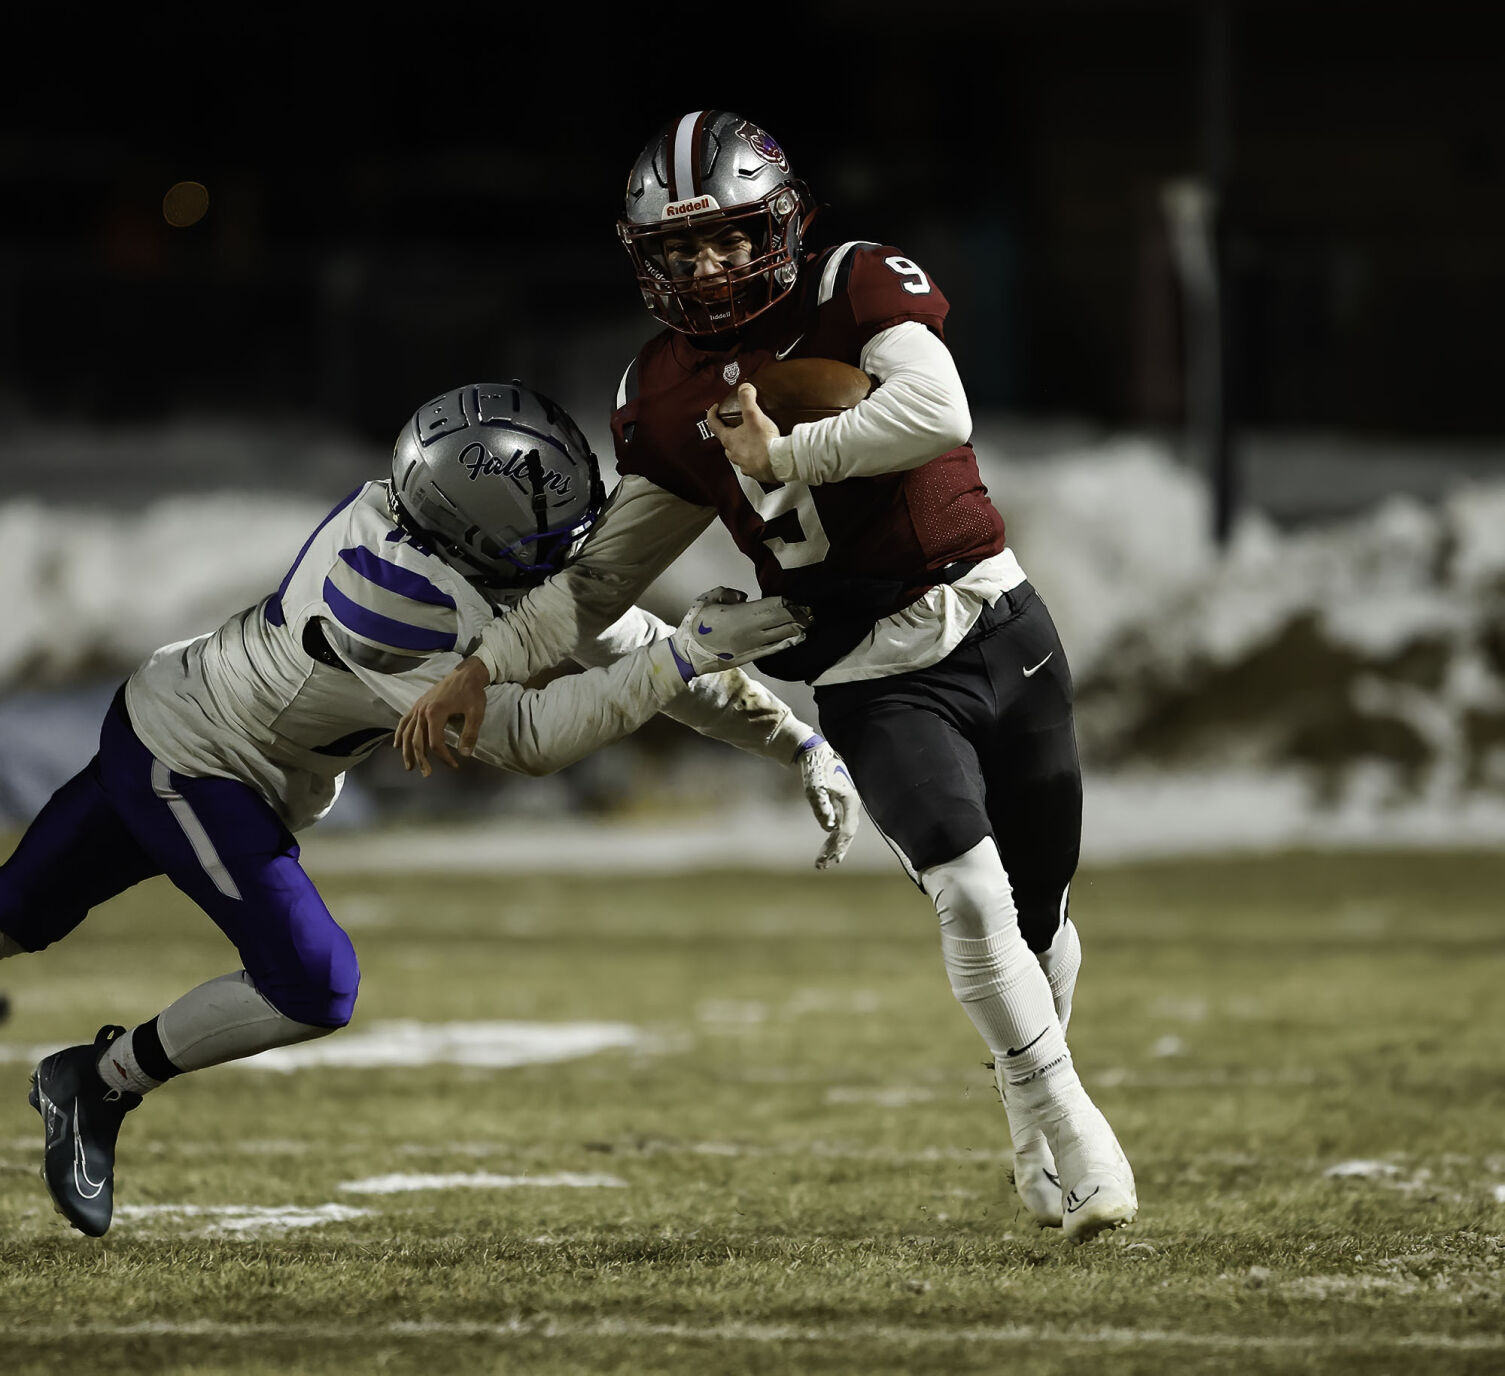 Helena High Football Overcomes Freezing Temperatures to Win Fifth Straight Game